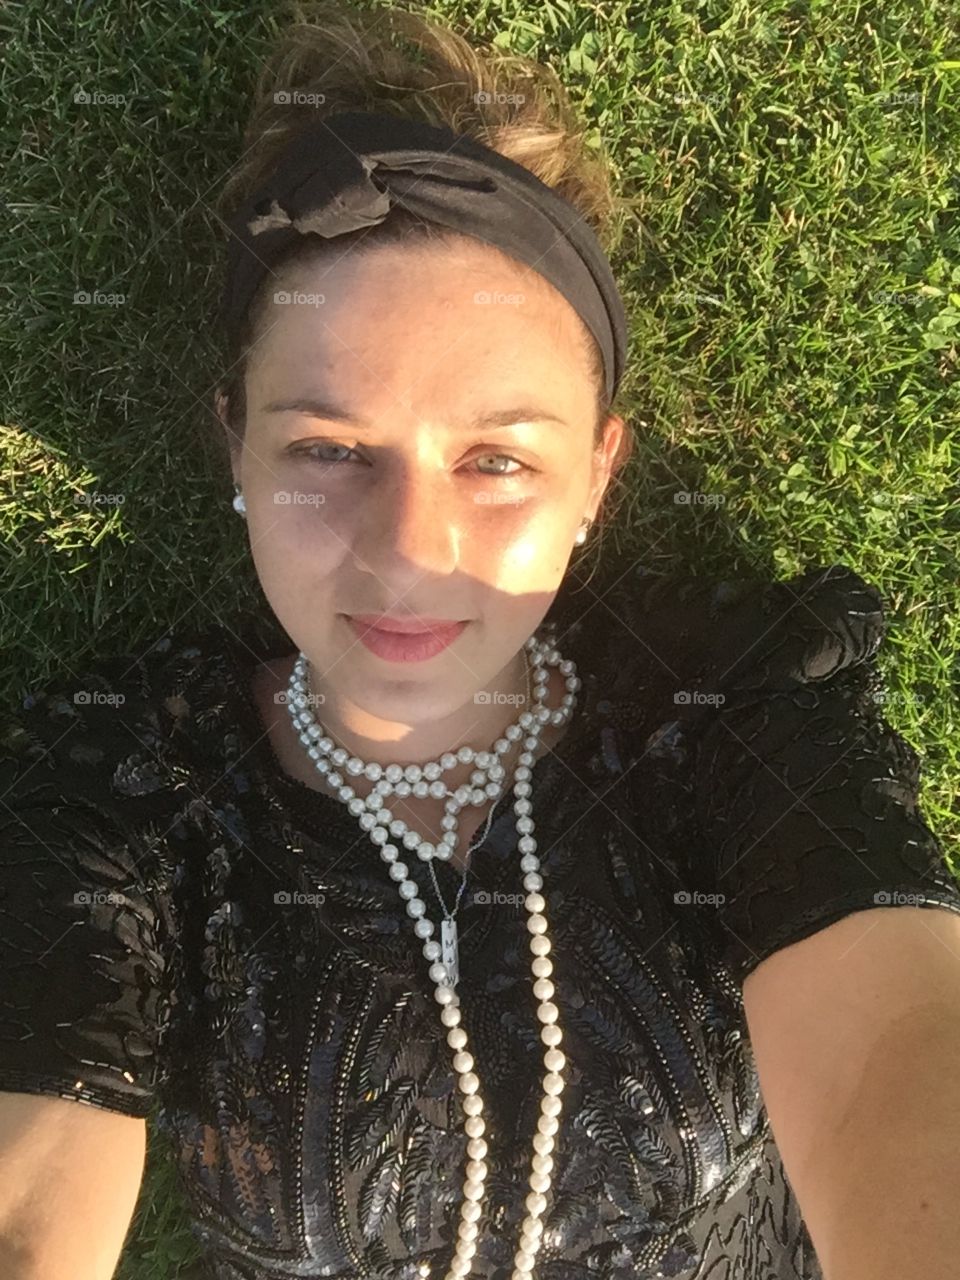 Selfie on the grass with pearls